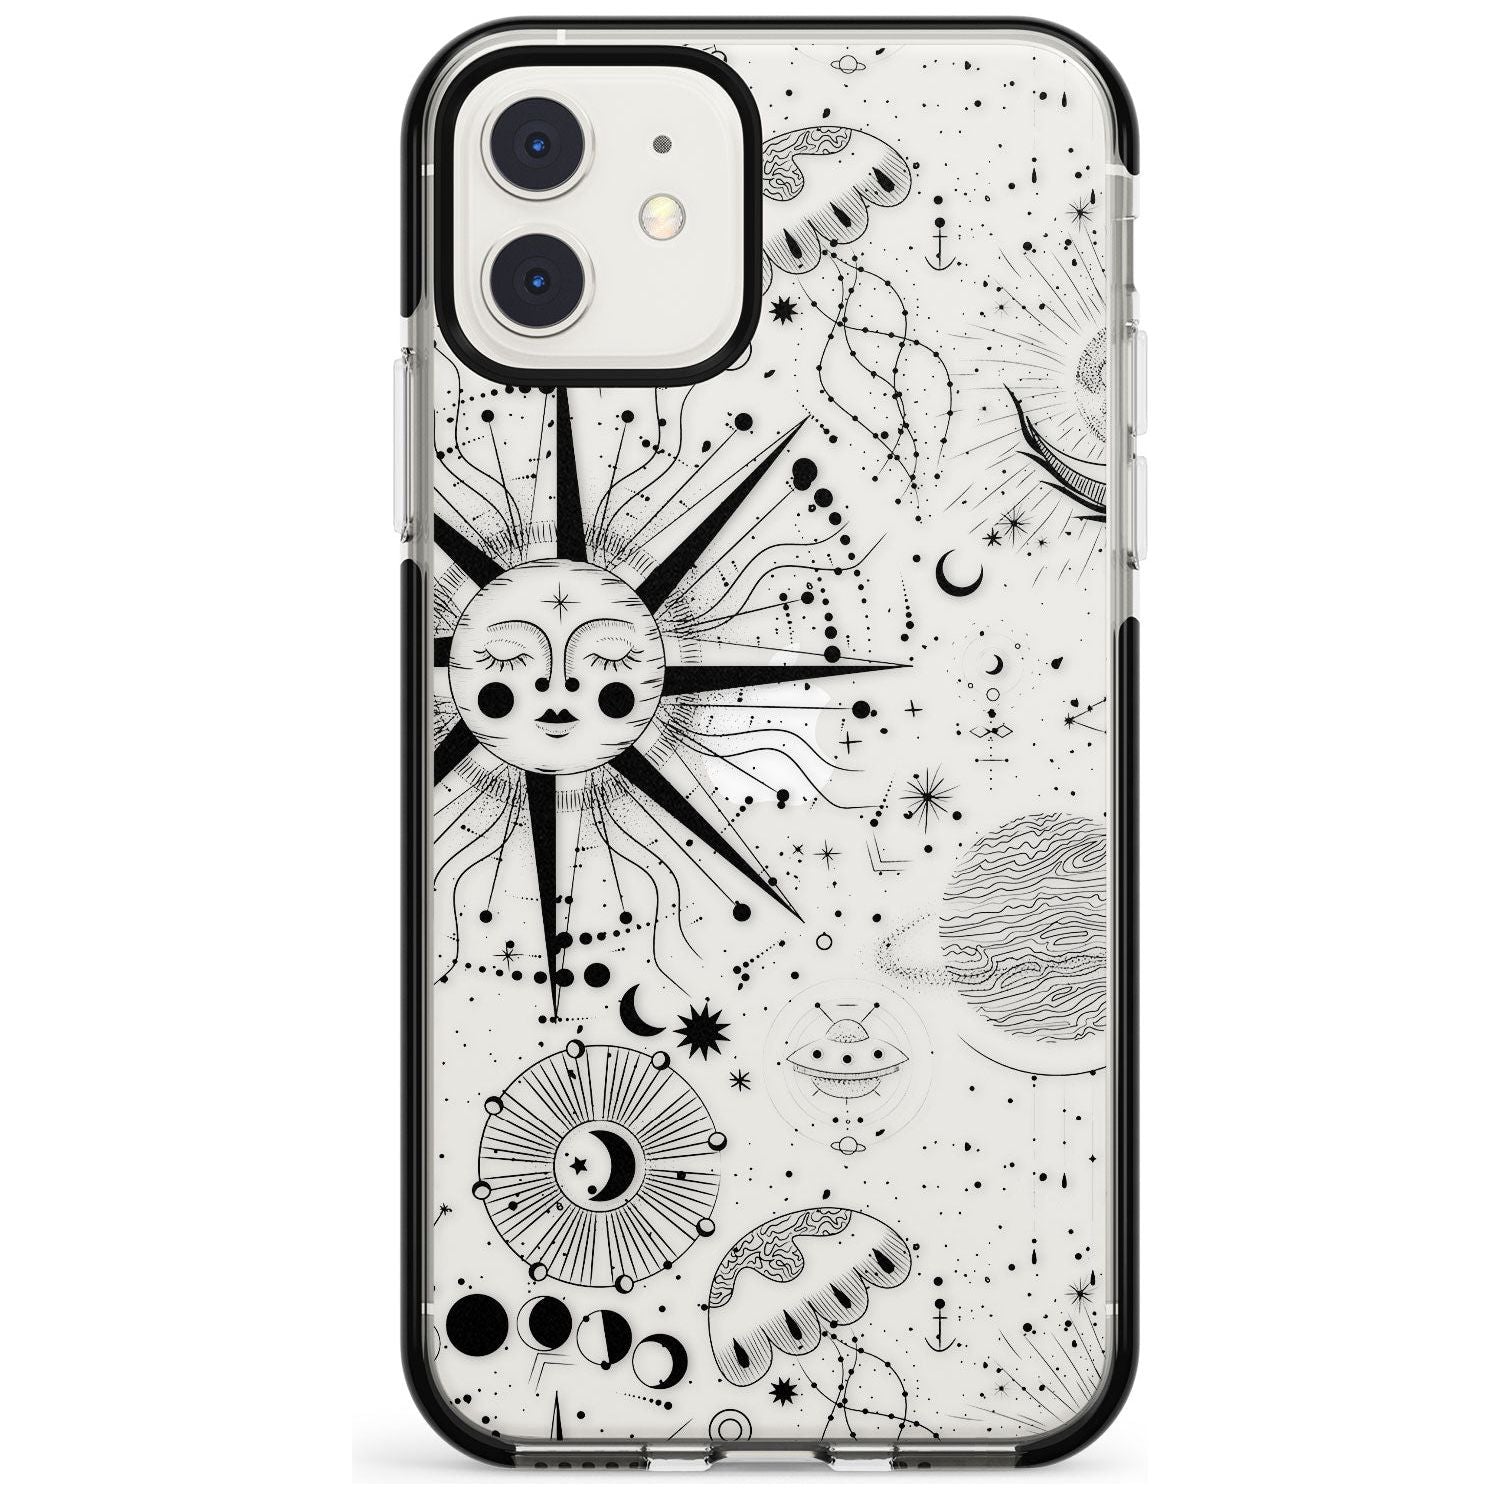 Large Sun Vintage Astrological Black Impact Phone Case for iPhone 11